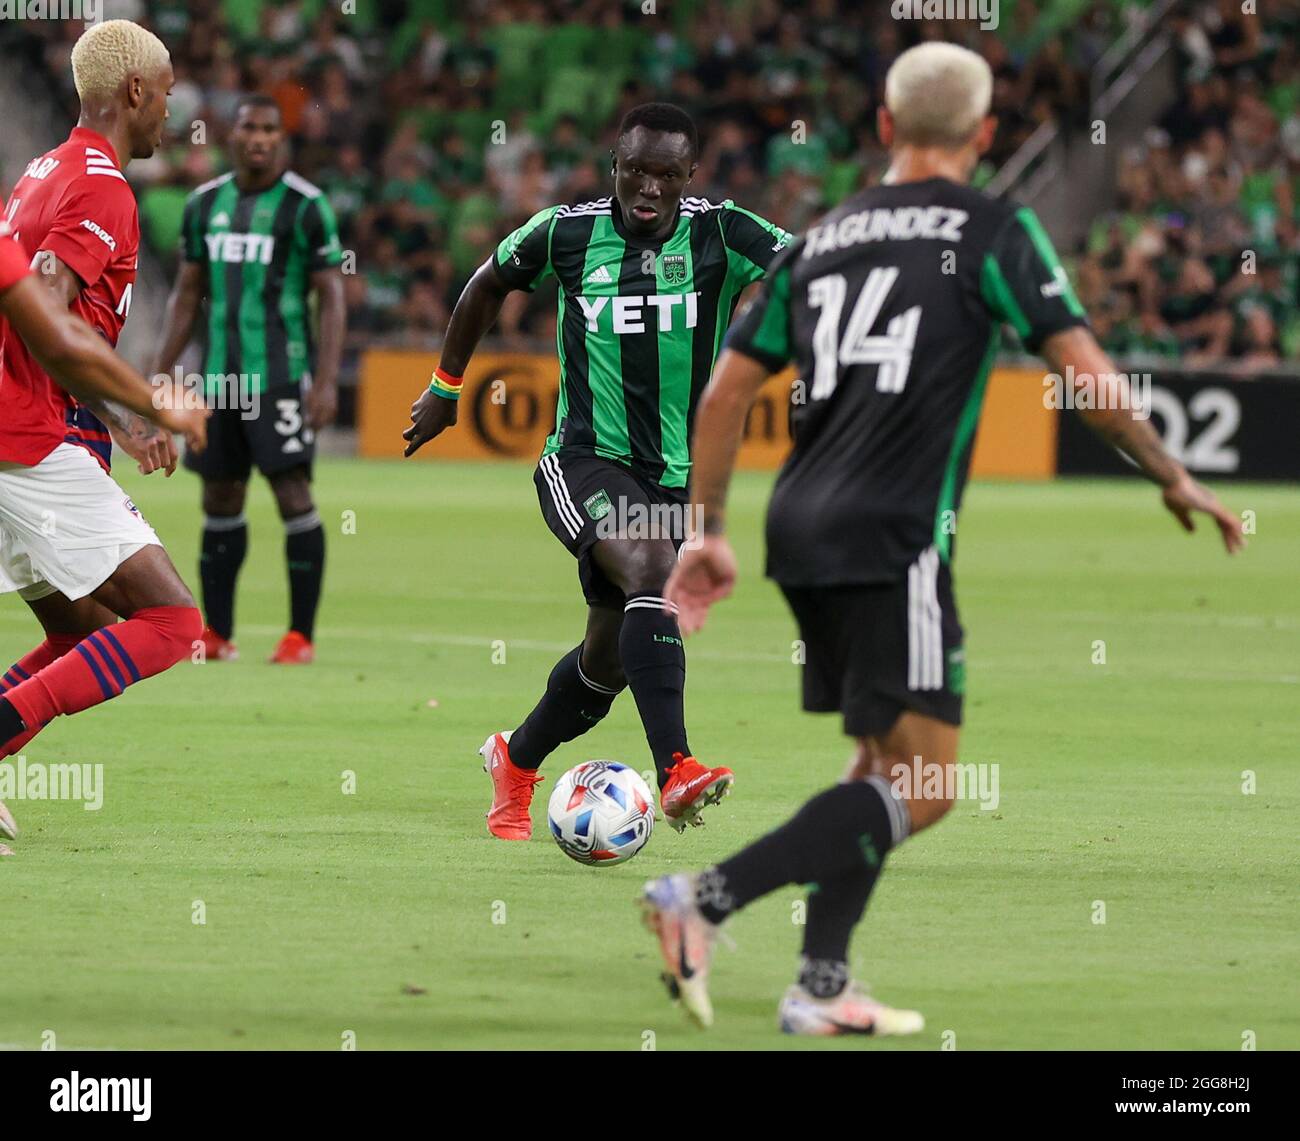 Austin, Texas, USA. August 29, 2021: Austin FC forward Moussa Djitte (99) moves the ball during an MLS match between Austin FC and FC Dallas on August 29, 2021 in Austin, Texas. (Credit Image: © Scott Coleman/ZUMA Press Wire) Credit: ZUMA Press, Inc./Alamy Live News Stock Photo